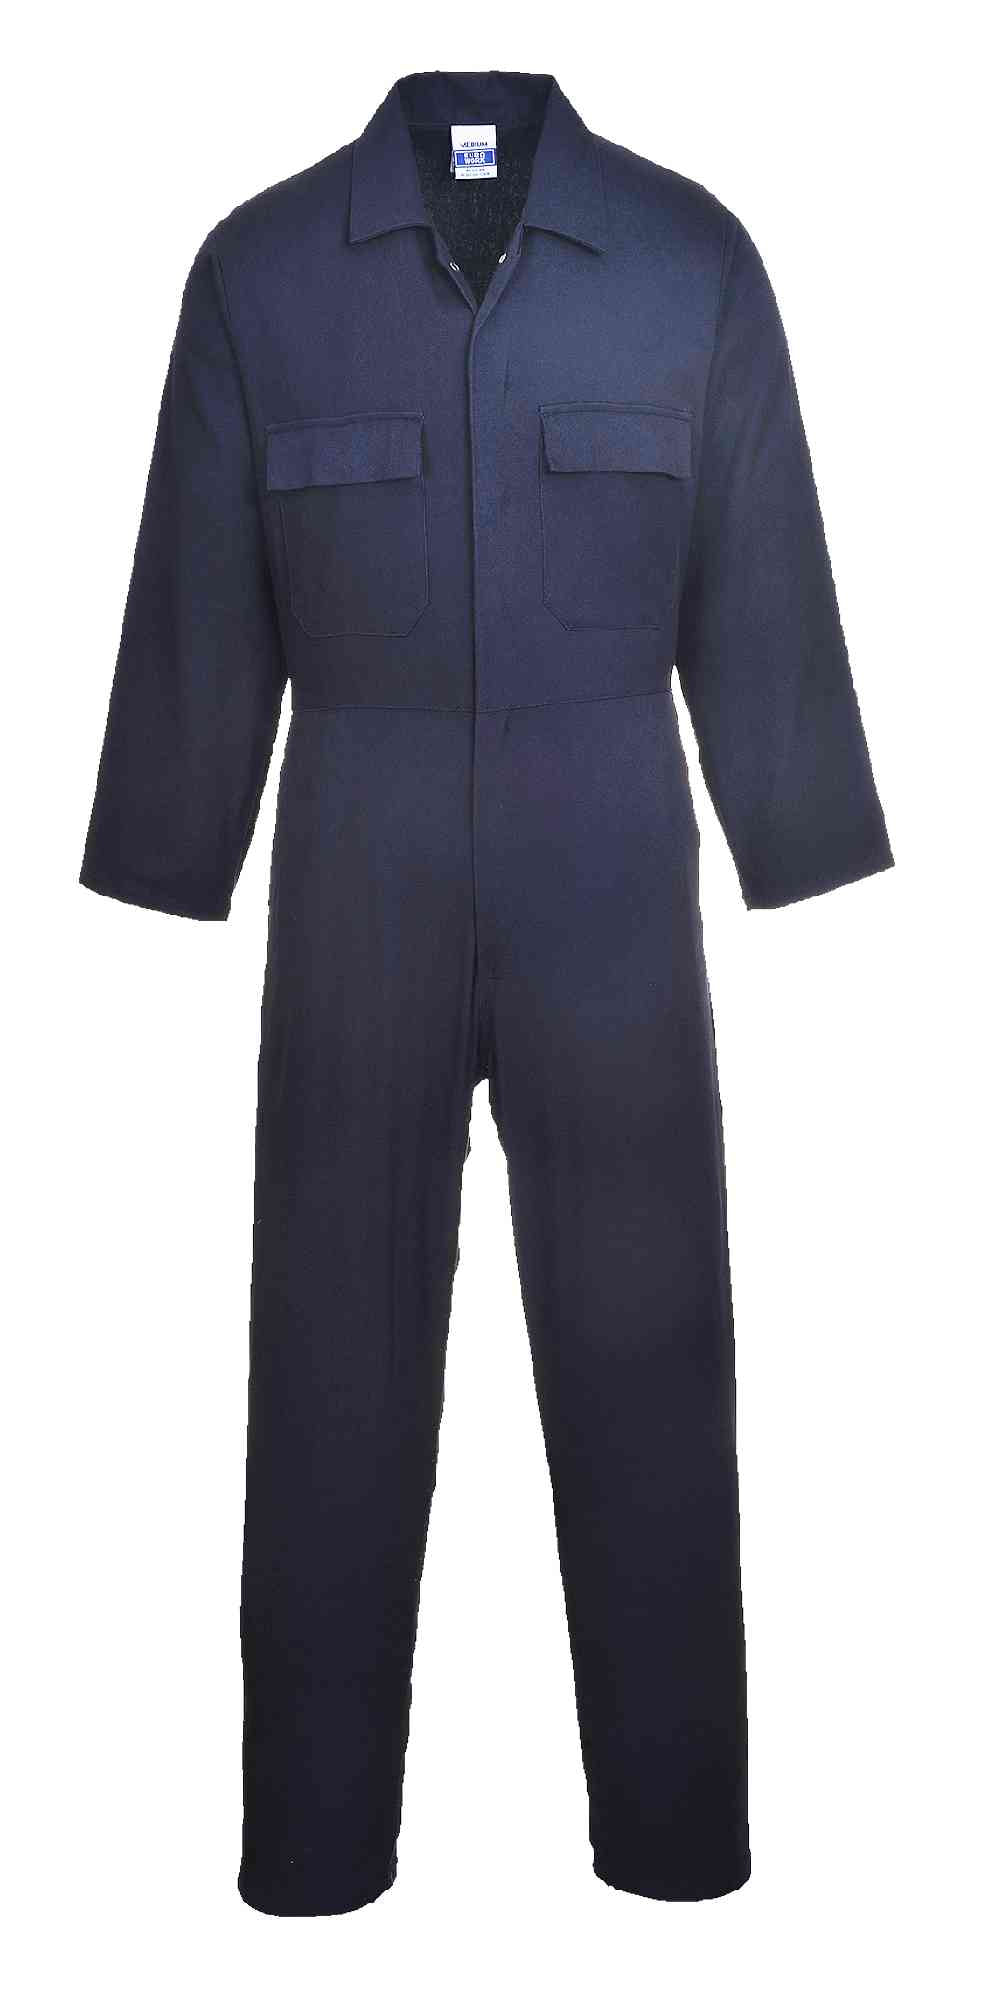 Portwest S998 Euro Multi Pockets Work Cotton Coverall Boiler Suit Navy